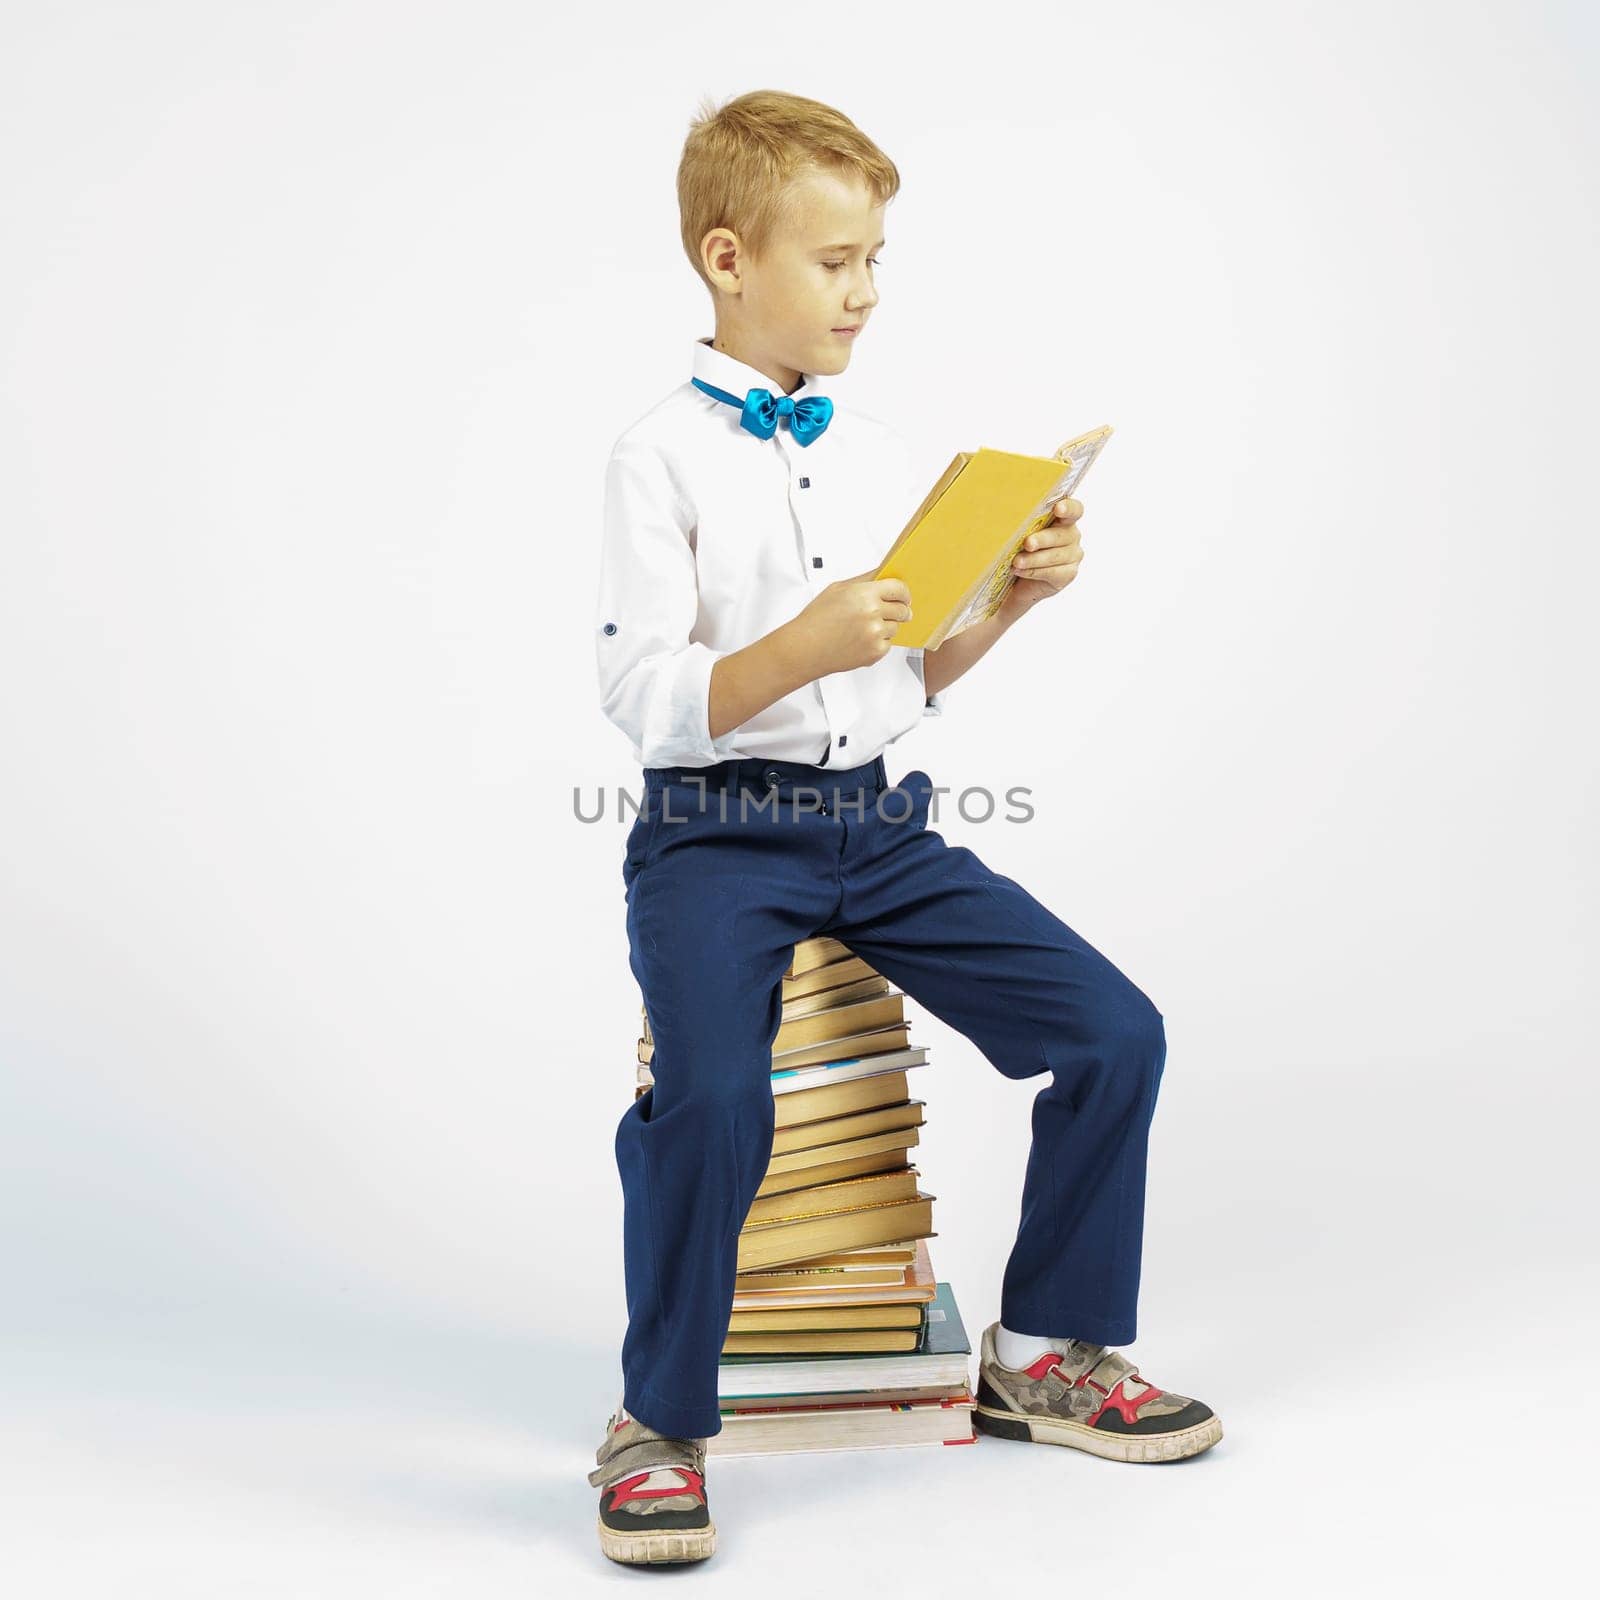 The schoolboy is sitting on books and reading a book. Isolated background. by Sd28DimoN_1976